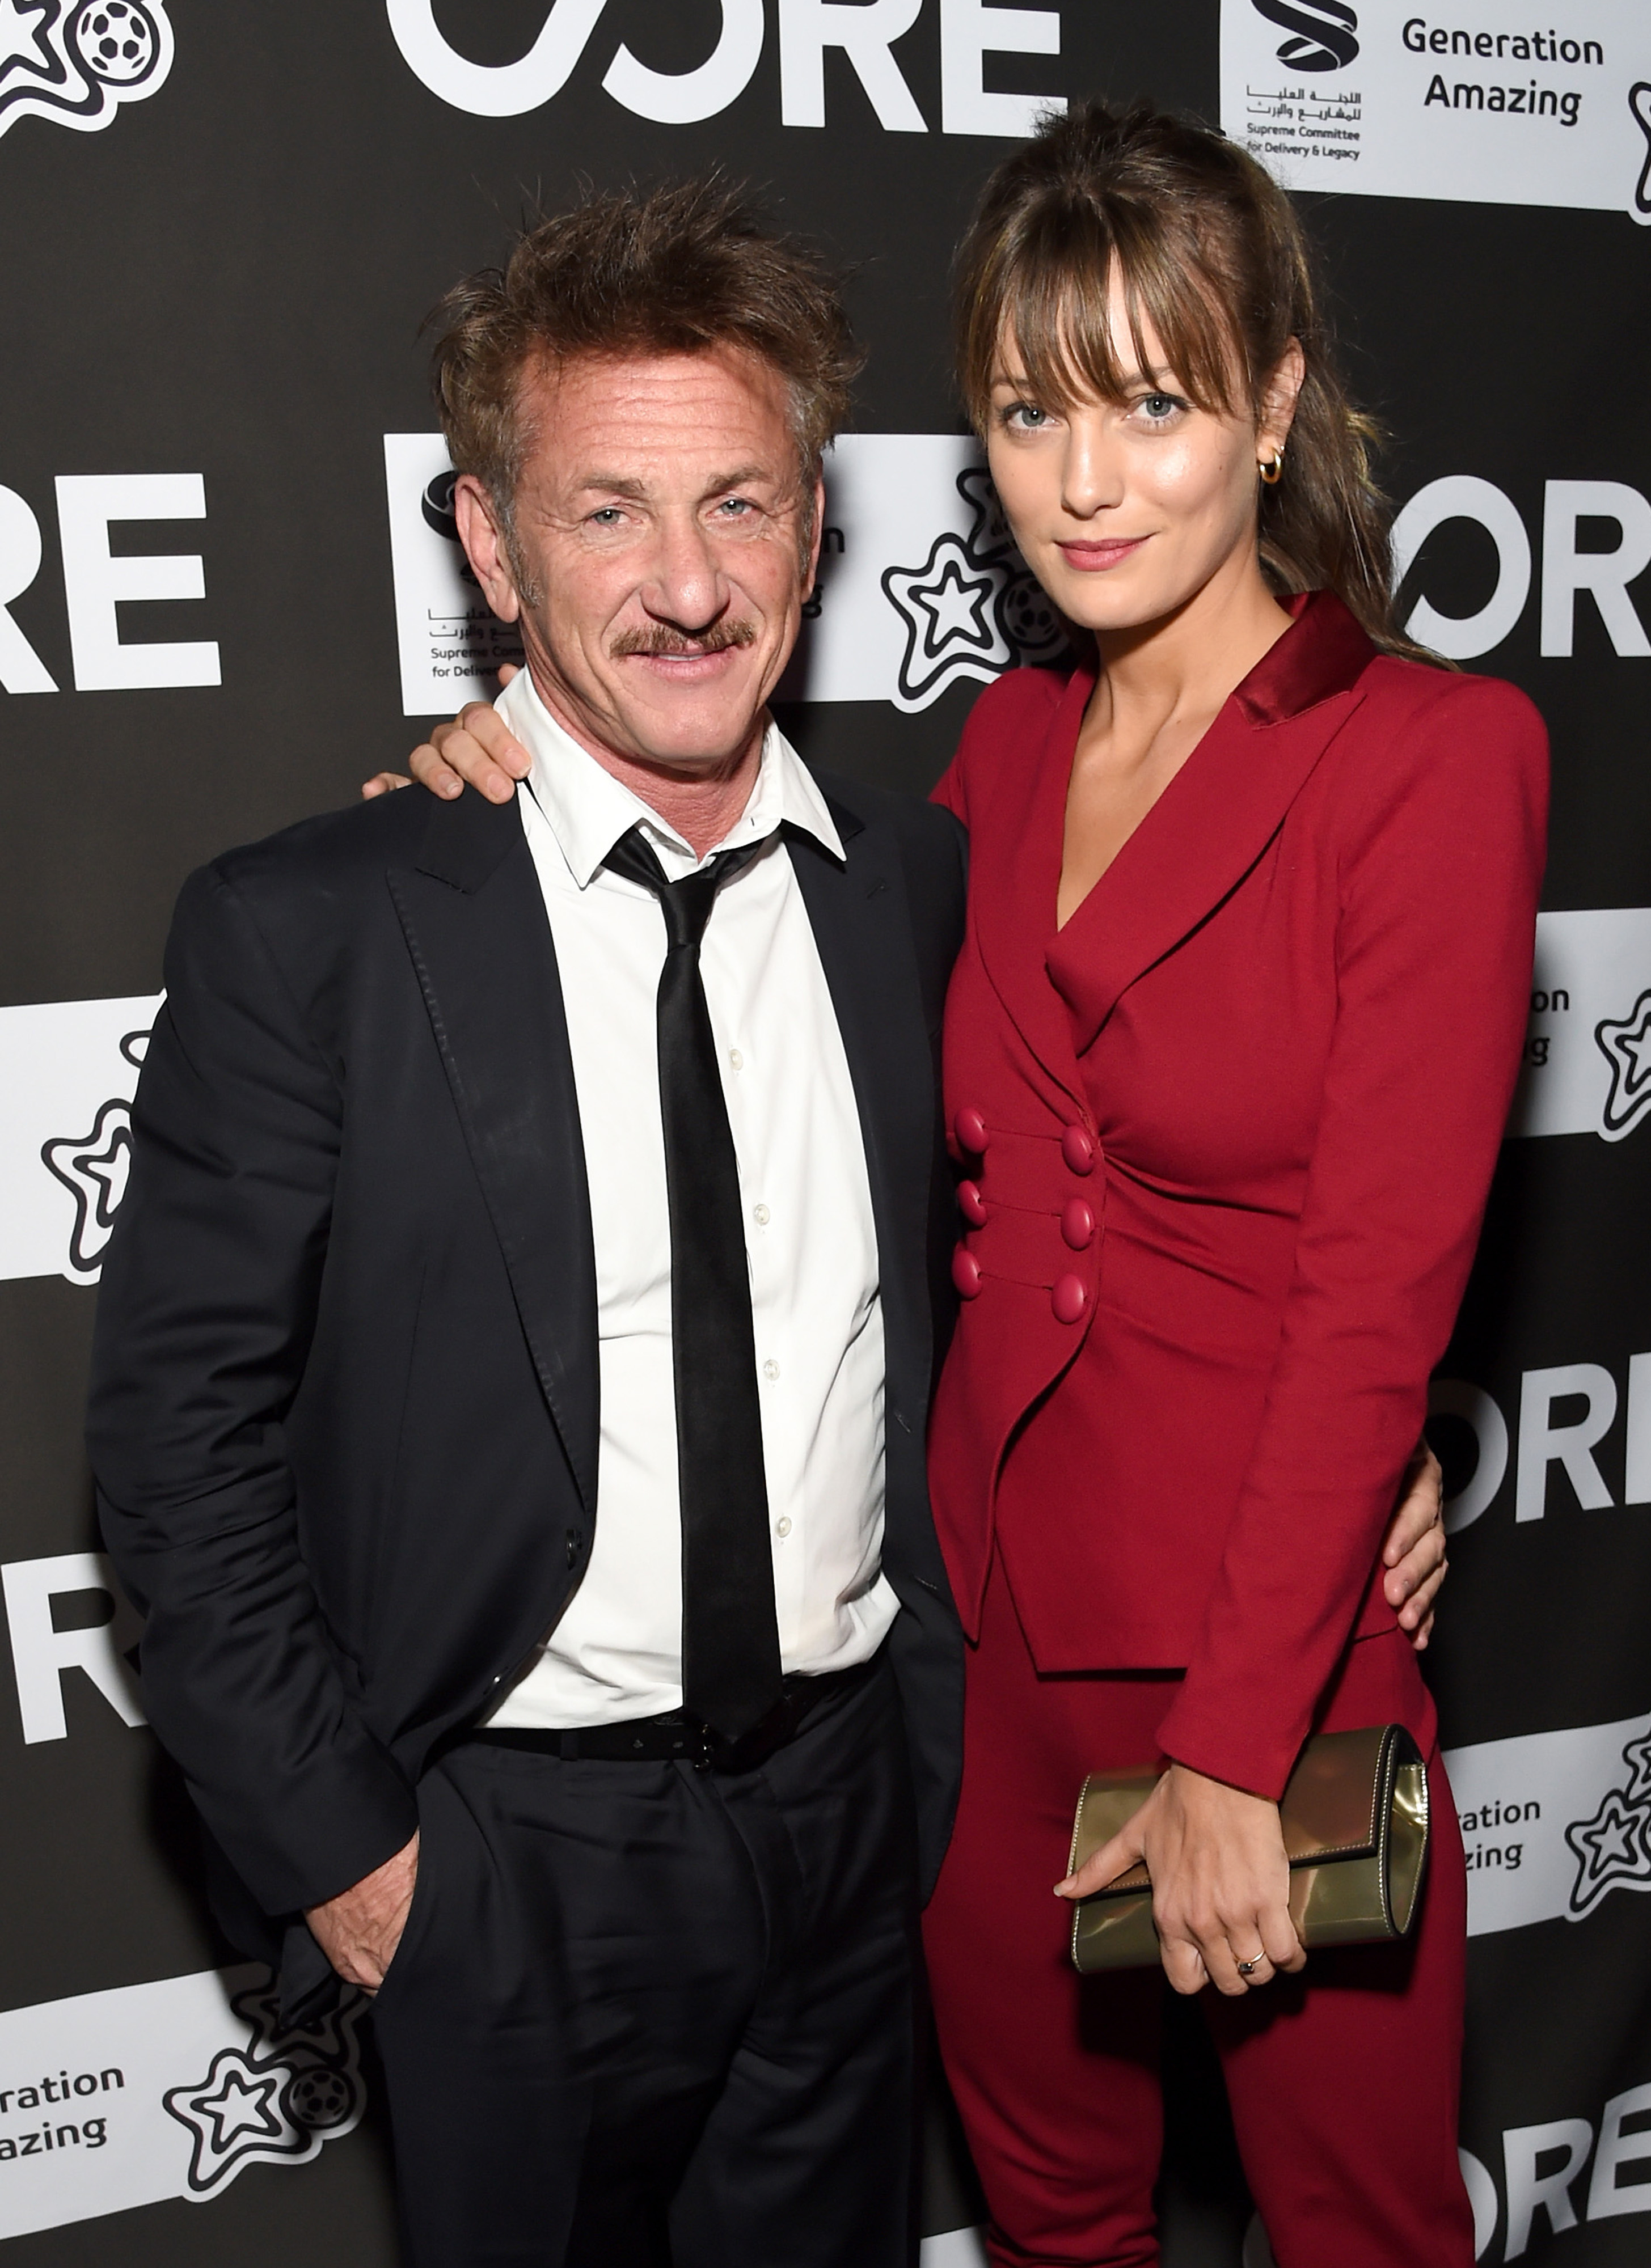 <p>In October 2016, the world learned that actor-activist <a href="https://www.wonderwall.com/celebrity/profiles/overview/sean-penn-398.article">Sean Penn</a>, then 56, was romancing actress Leila George, then 24, when they were photographed sharing some PDA in the ocean. More than three years later in January 2020, the couple -- who have nearly 32 years between them -- made their official solo <a href="https://www.wonderwall.com/celebrity/couples/celeb-couples-red-carpet-debuts-hollywood-duos-announced-relationship-3020215.gallery">red carpet debut as a couple</a> at an event for his CORE charity, and six months after that, they <a href="https://www.wonderwall.com/news/sean-penn-59-quietly-marries-girlfriend-28-report-370910.article">tied the knot</a> in July 2020, Sean confirmed days later. (Sean, by the way, is only a year younger than Leila's father, actor Vincent D'Onofrio, and just a few months younger than her mother, actress Greta Scacchi.) But it didn't last: Leila filed for divorce in October 2021 after just 14 months of marriage.</p>